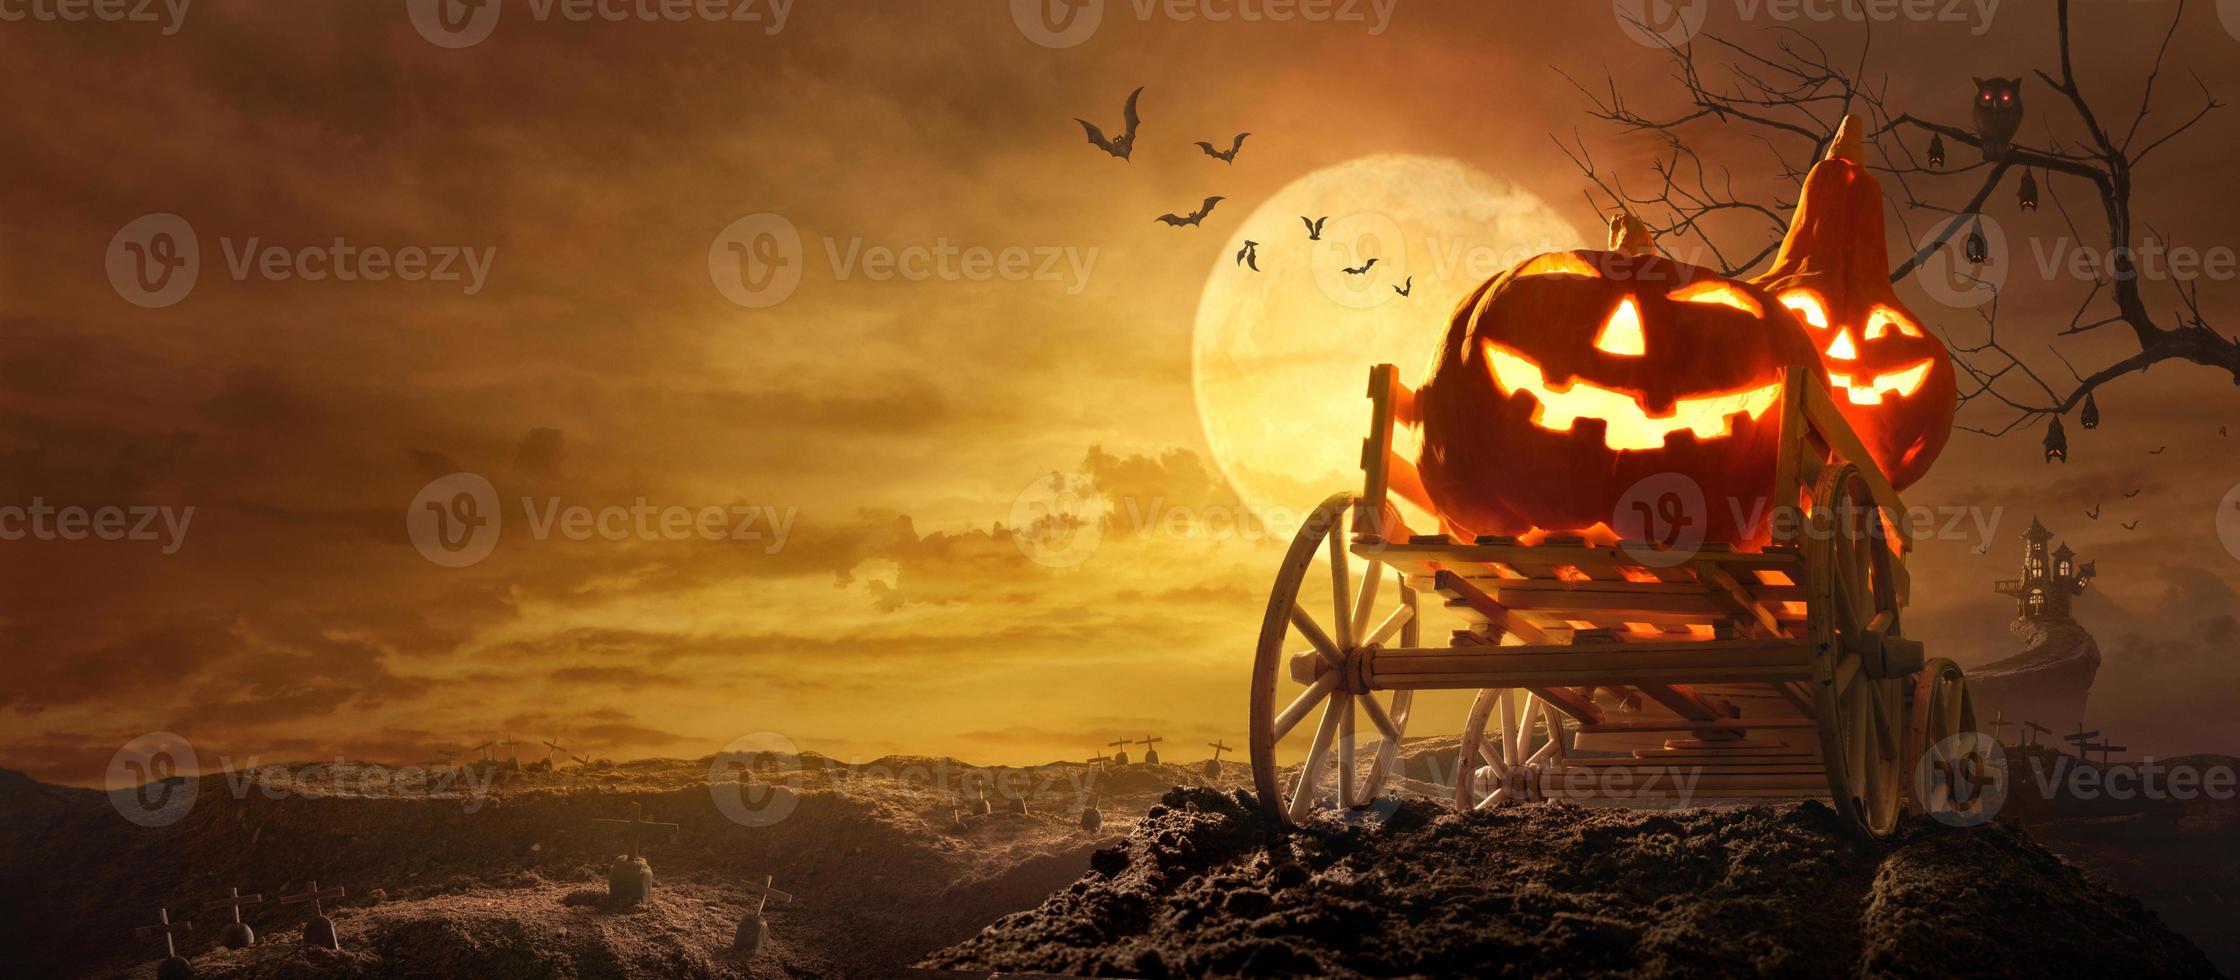 Halloween pumpkins on farm wagon going through Stretched road grave to Castle spooky in night of full moon and bats flying photo